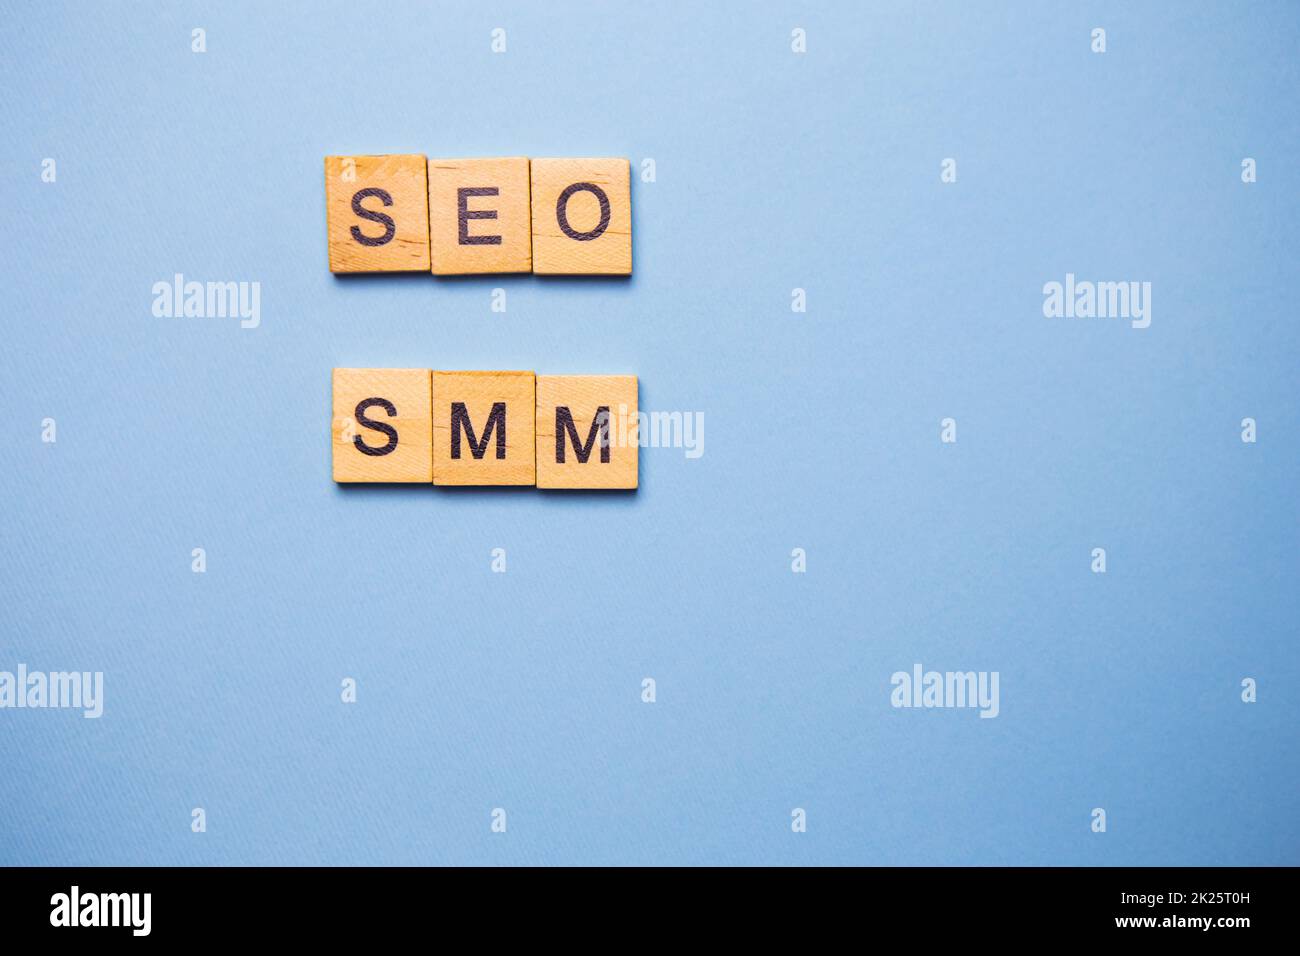 Wooden letters SEO and SMM are printed on a light blue background. Stock Photo